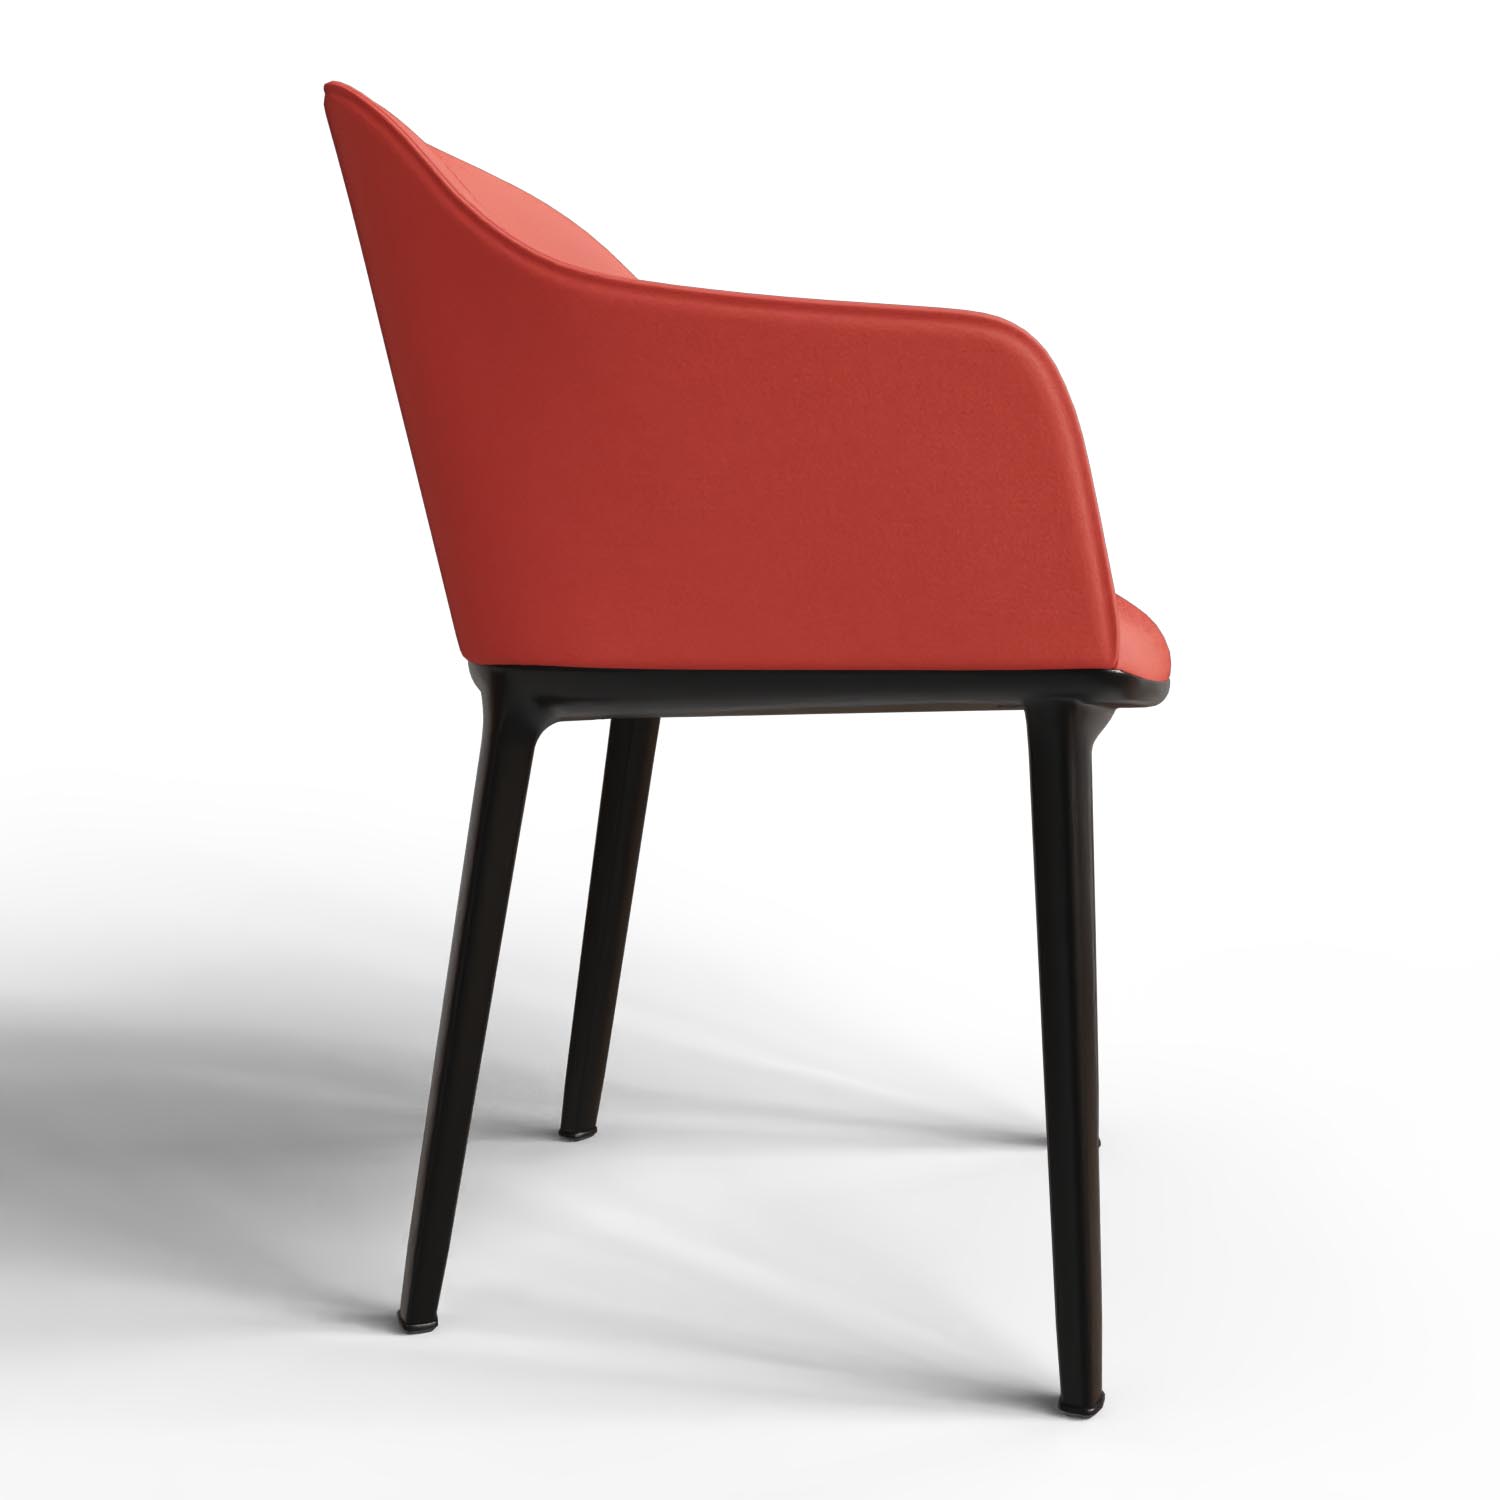 Softshell Chair 42300600 in Poppy Red